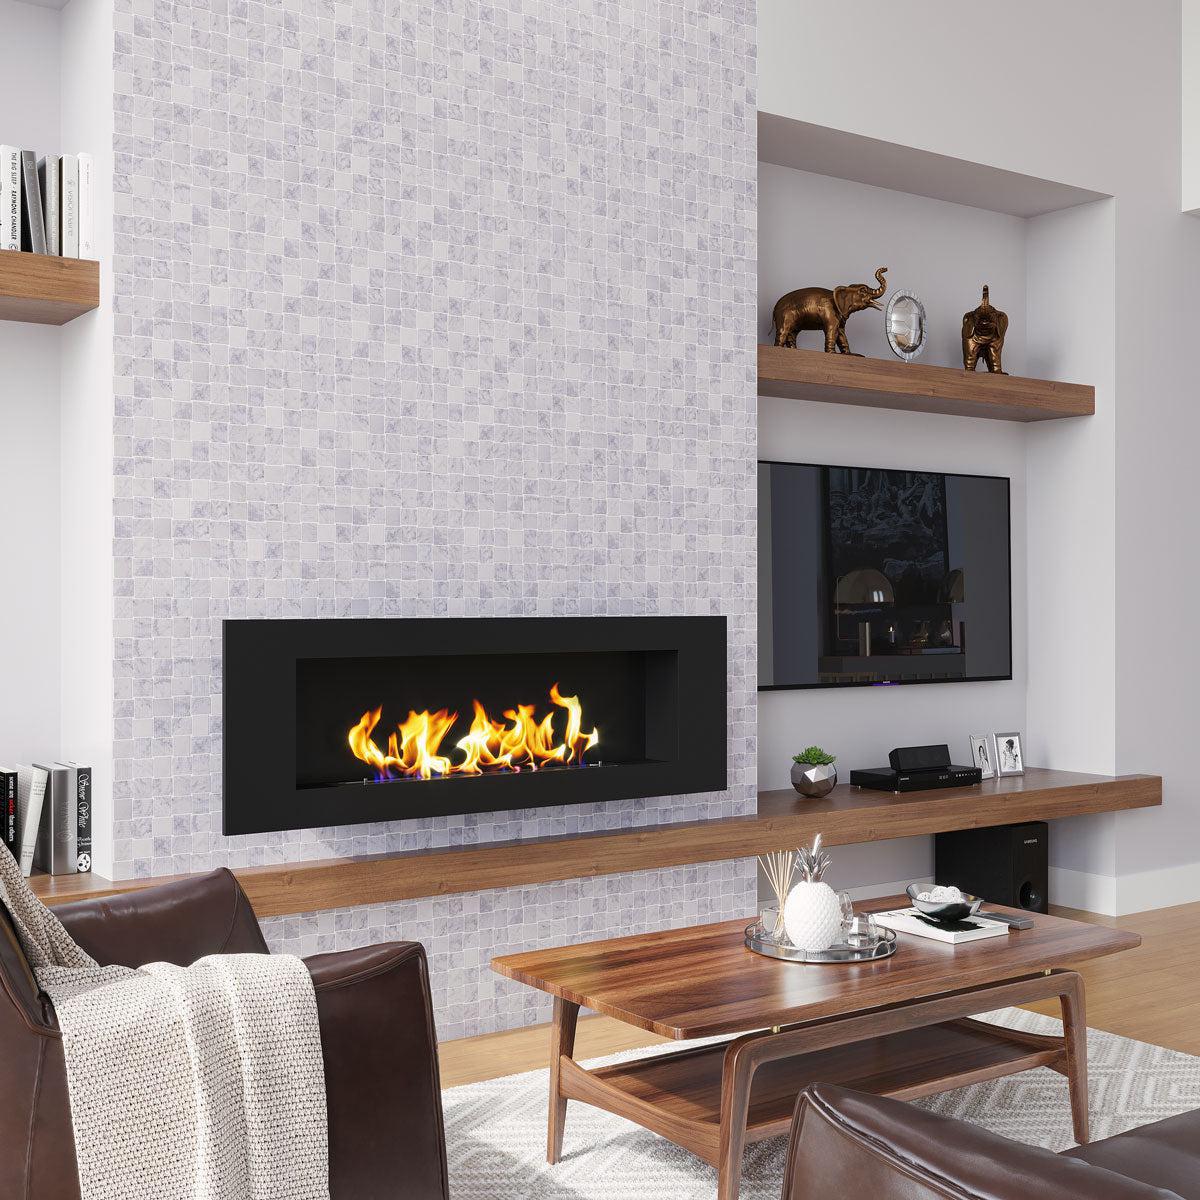 Modern Living Room with Natural Wood Details and  Textured Carrara Brick Marble Mosaic Tile Fireplace Surround